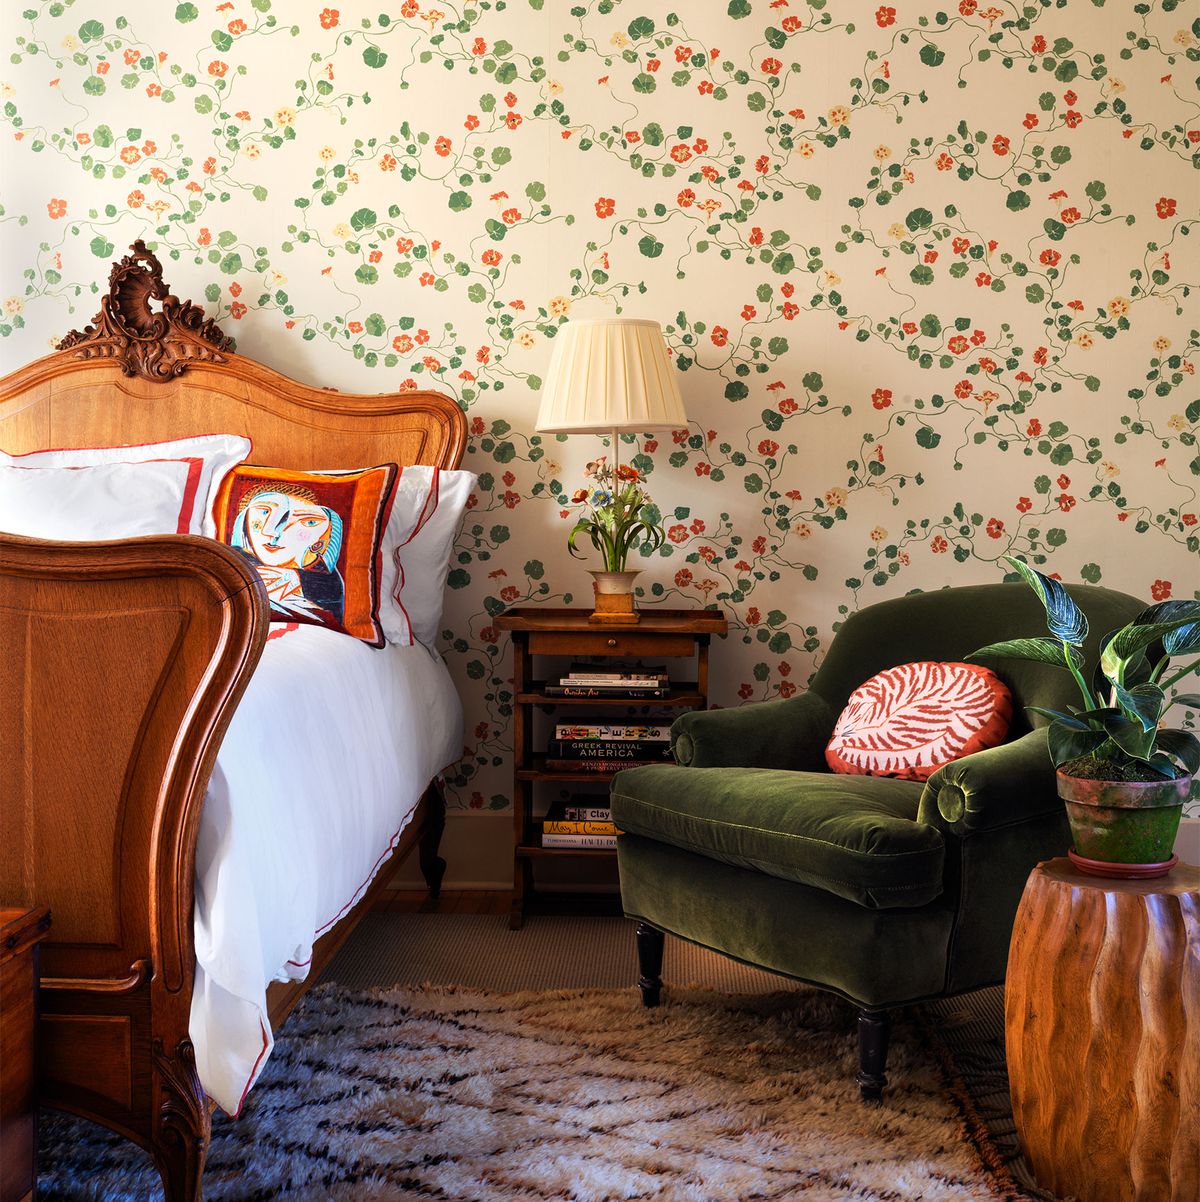 The Floral Wallpaper Trend We're Seeing Everywhere - Wallpaper Trend 2022